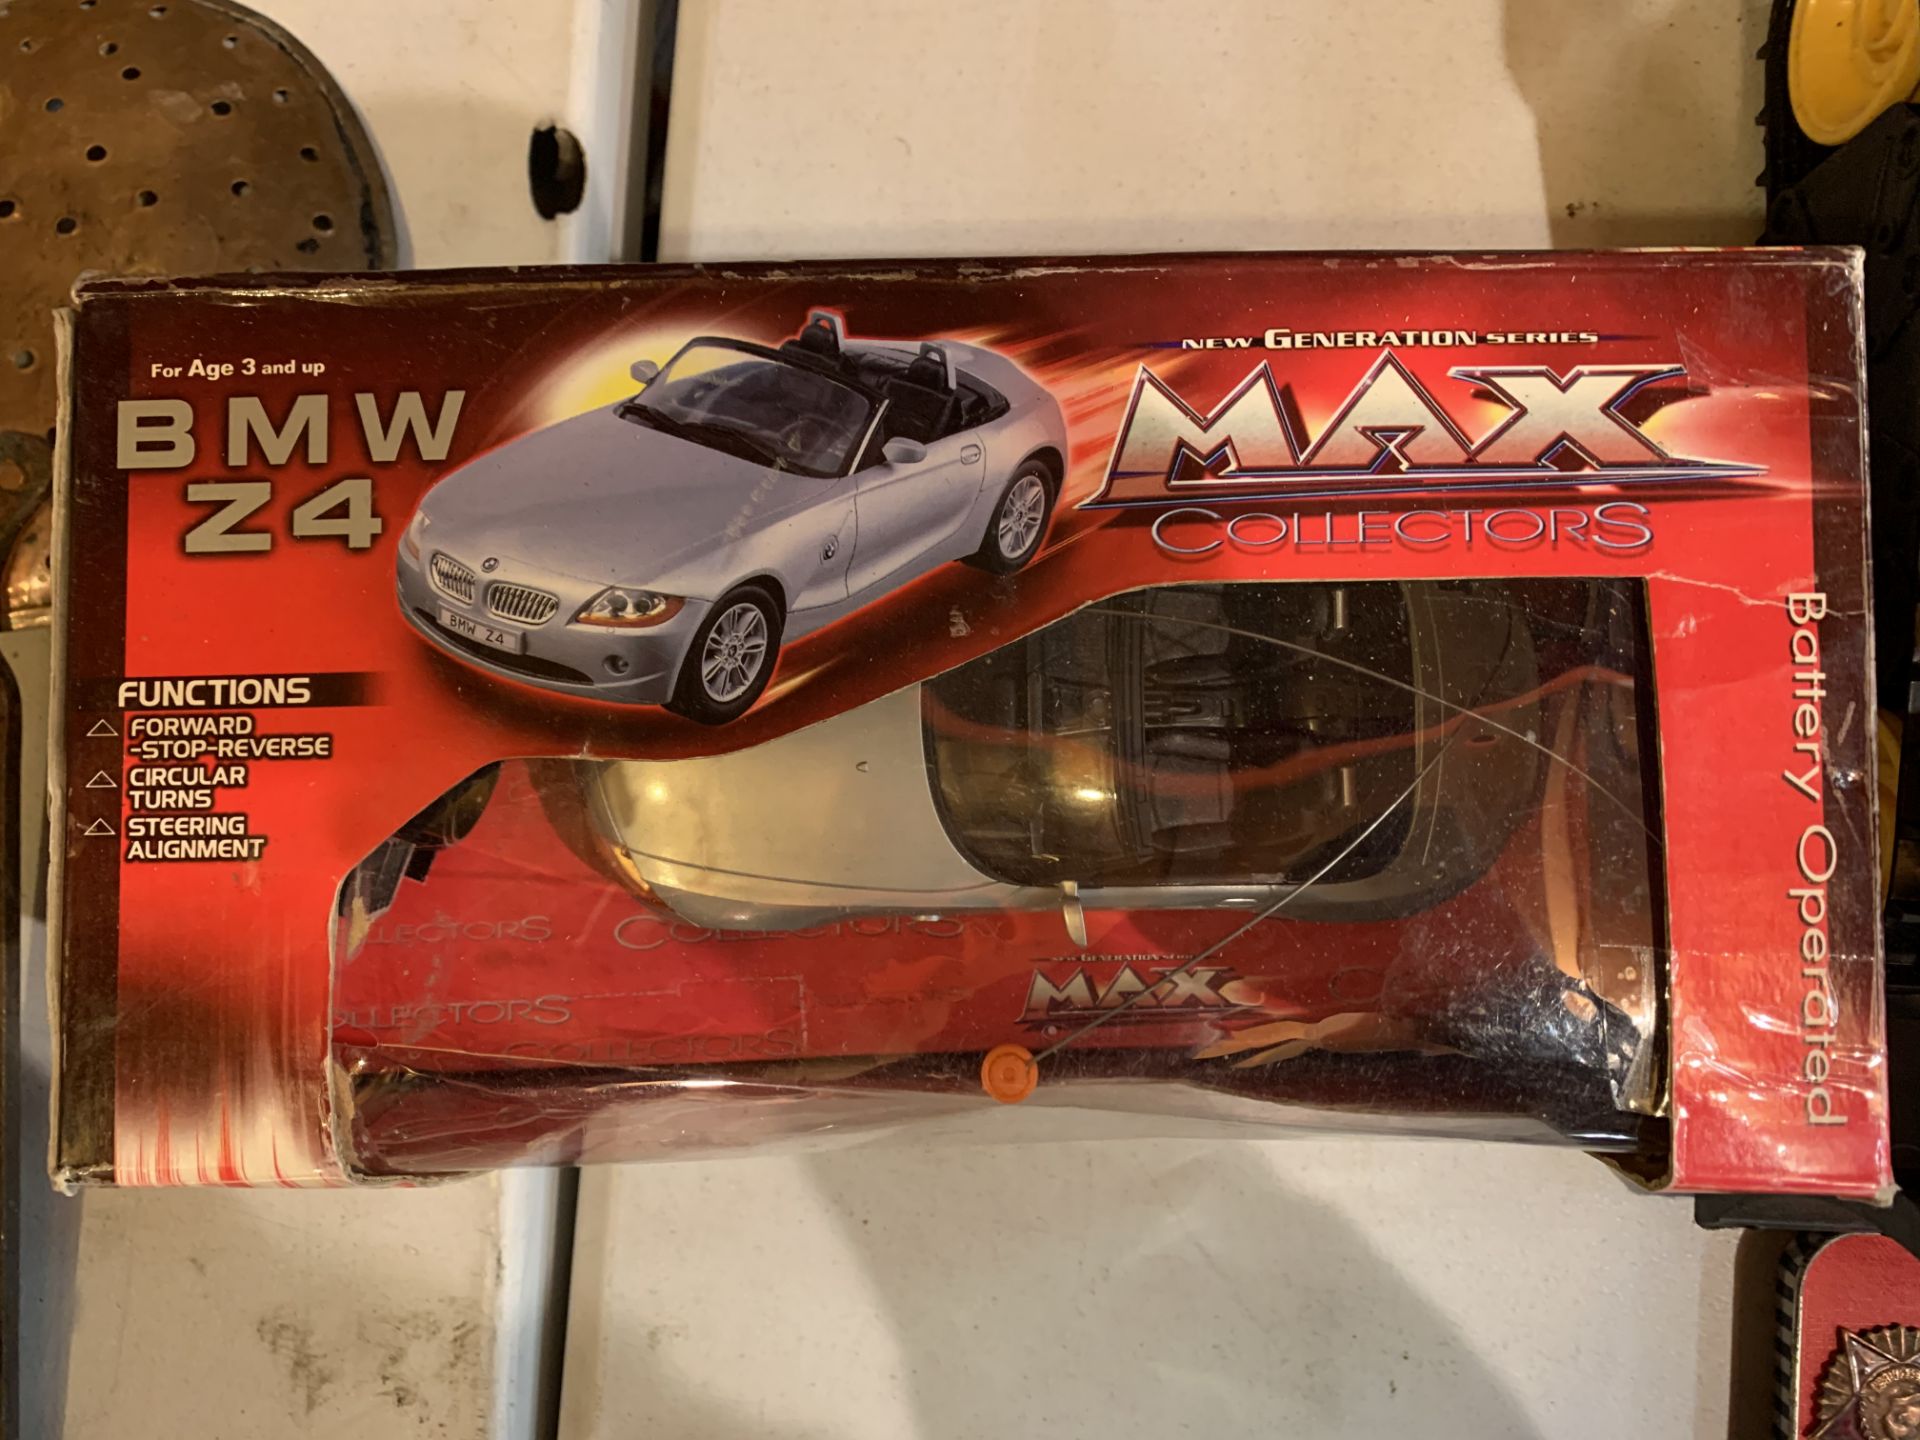 A BOXED NEW GENERATION SERIES MAX COLLECTORS RADIO CONTROLLED BMW 24 - Image 3 of 3